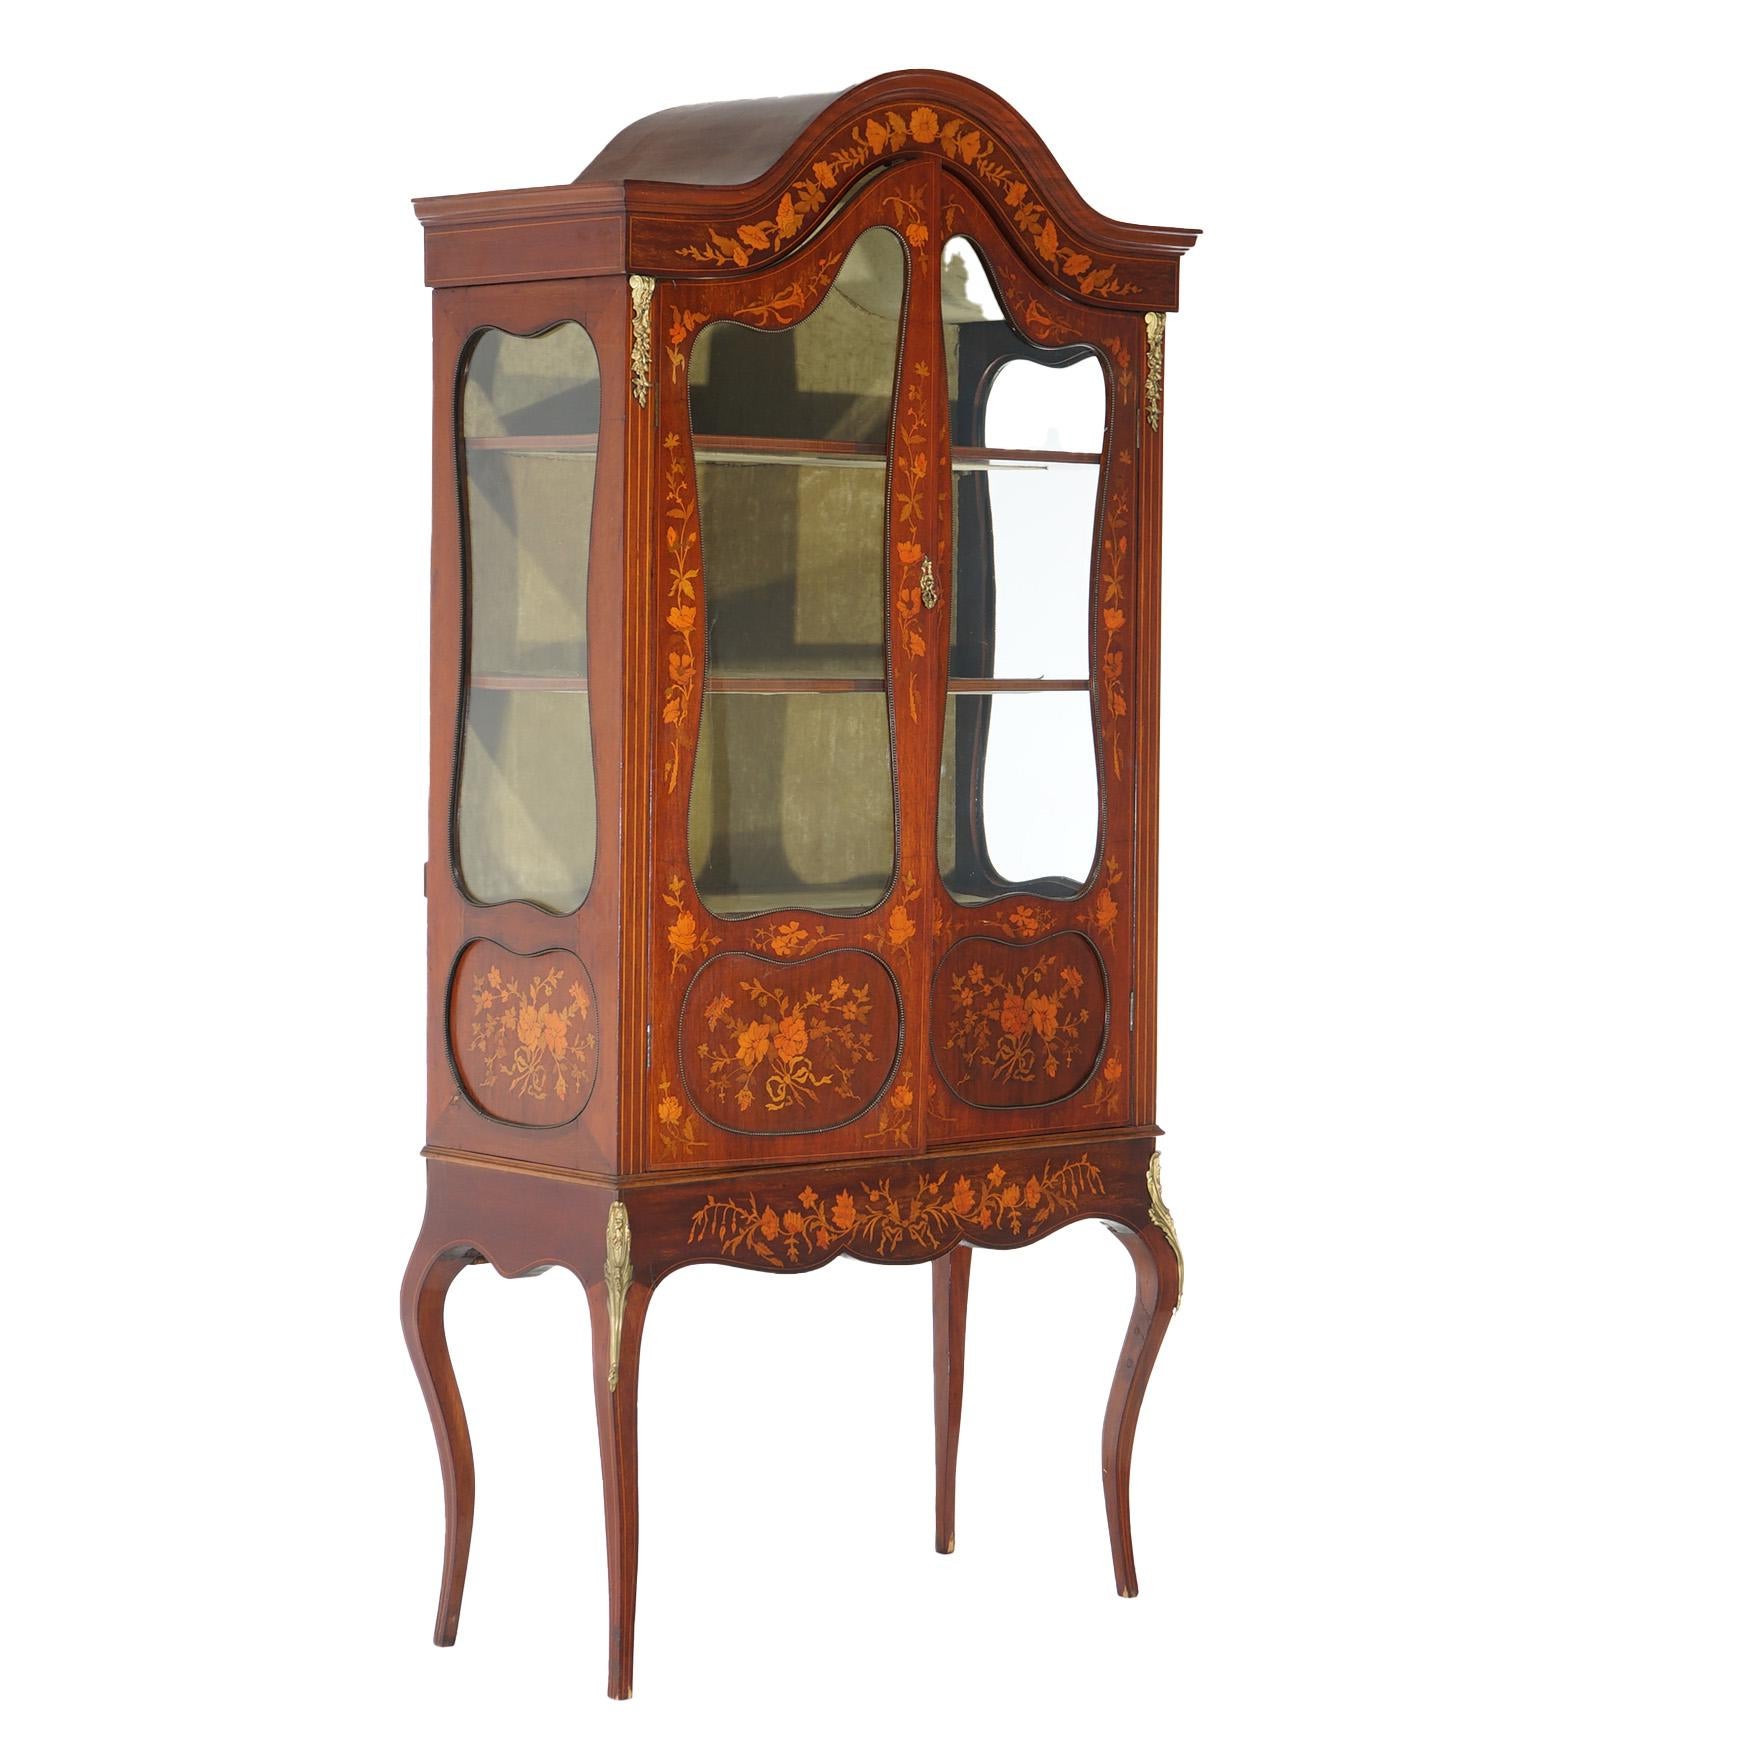 An antique Dutch marquetry display curio cabinet offers mahogany construction with arched form with double glass doors opening to shelved interior, satinwood inlay in floral design throughout, ormolu mounts and raised on cabriole legs,